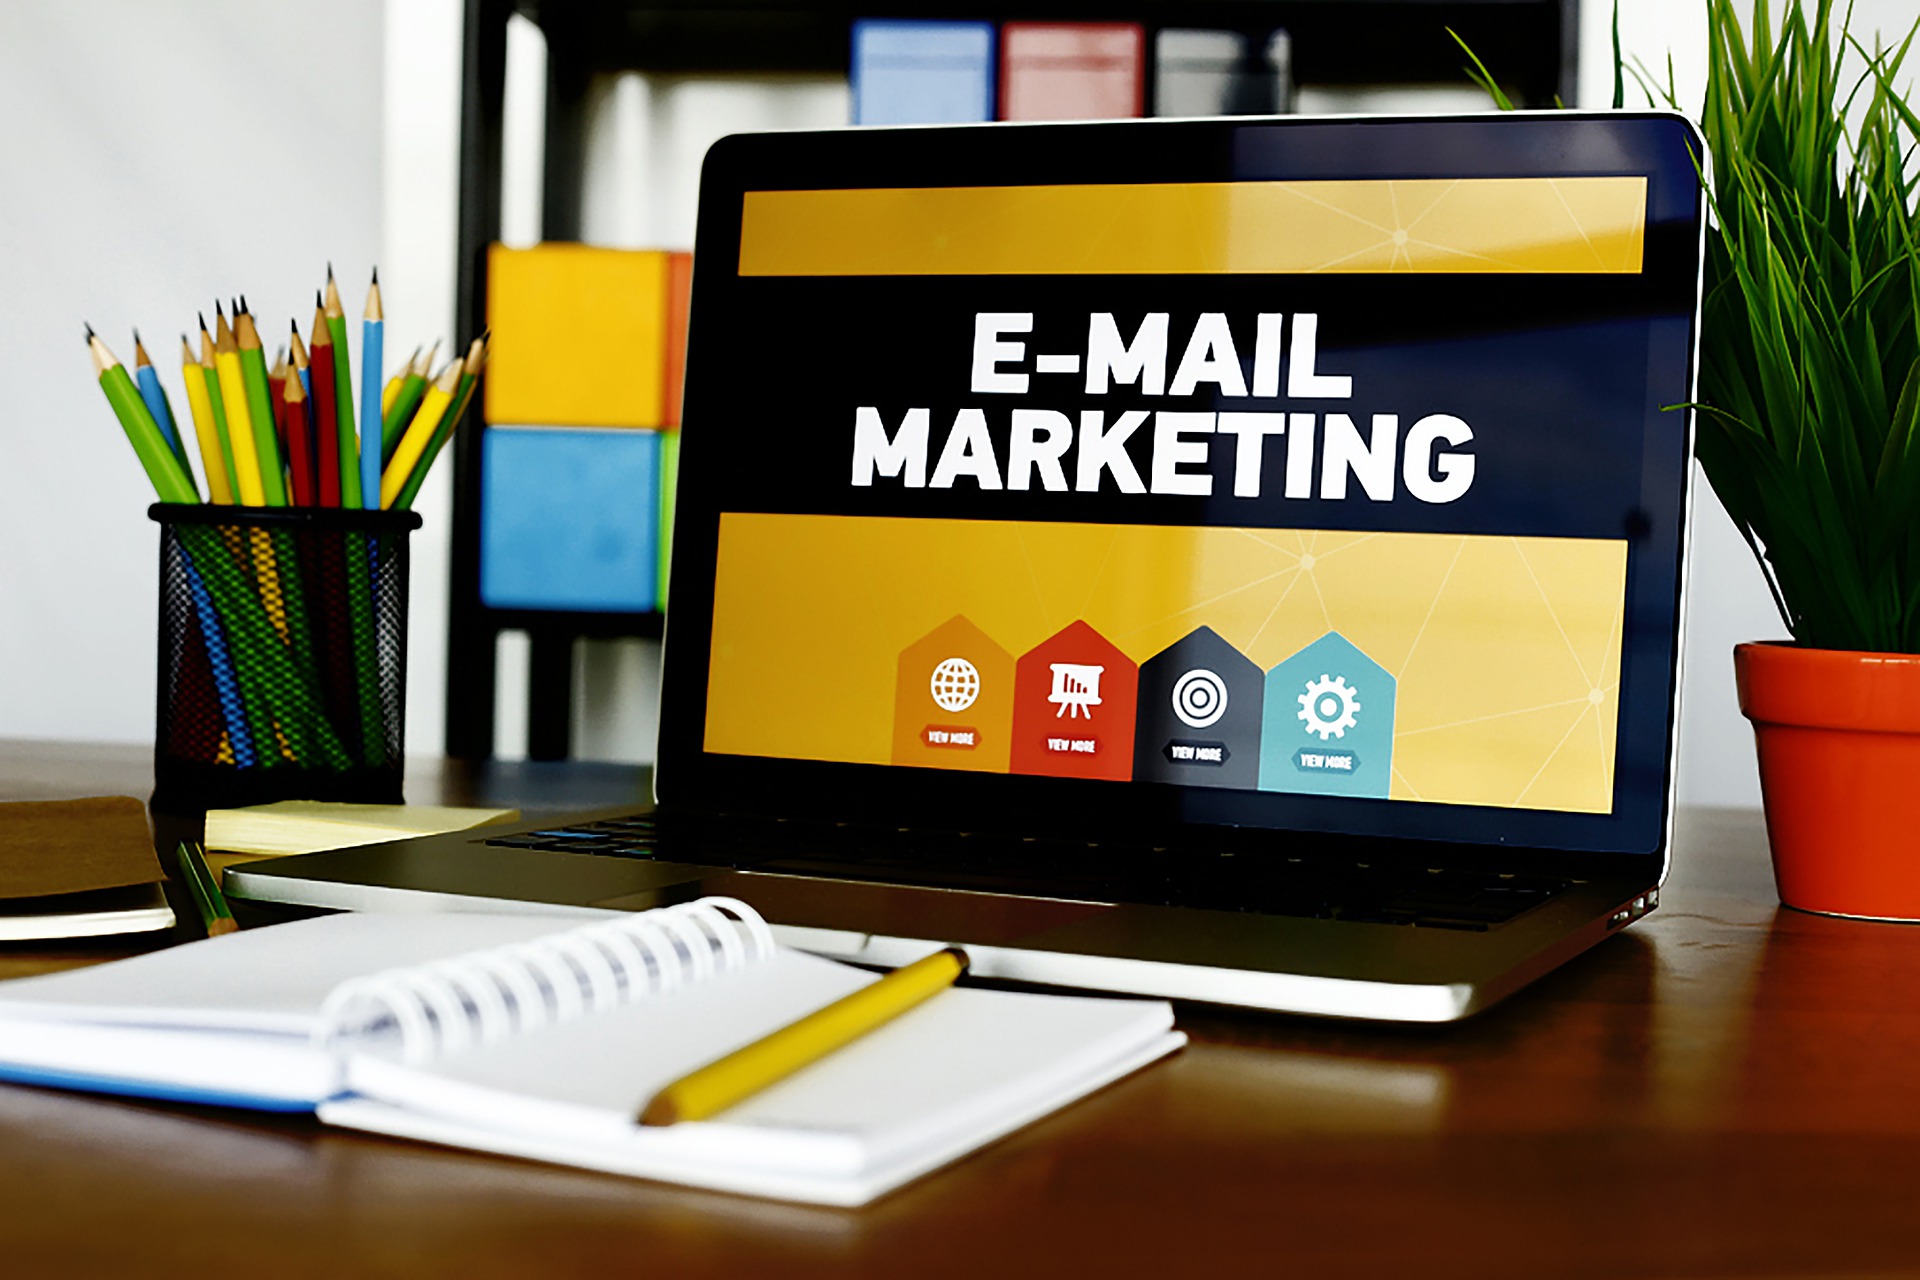 How to Make Your Email Marketing Content More Engaging | BusinessMole